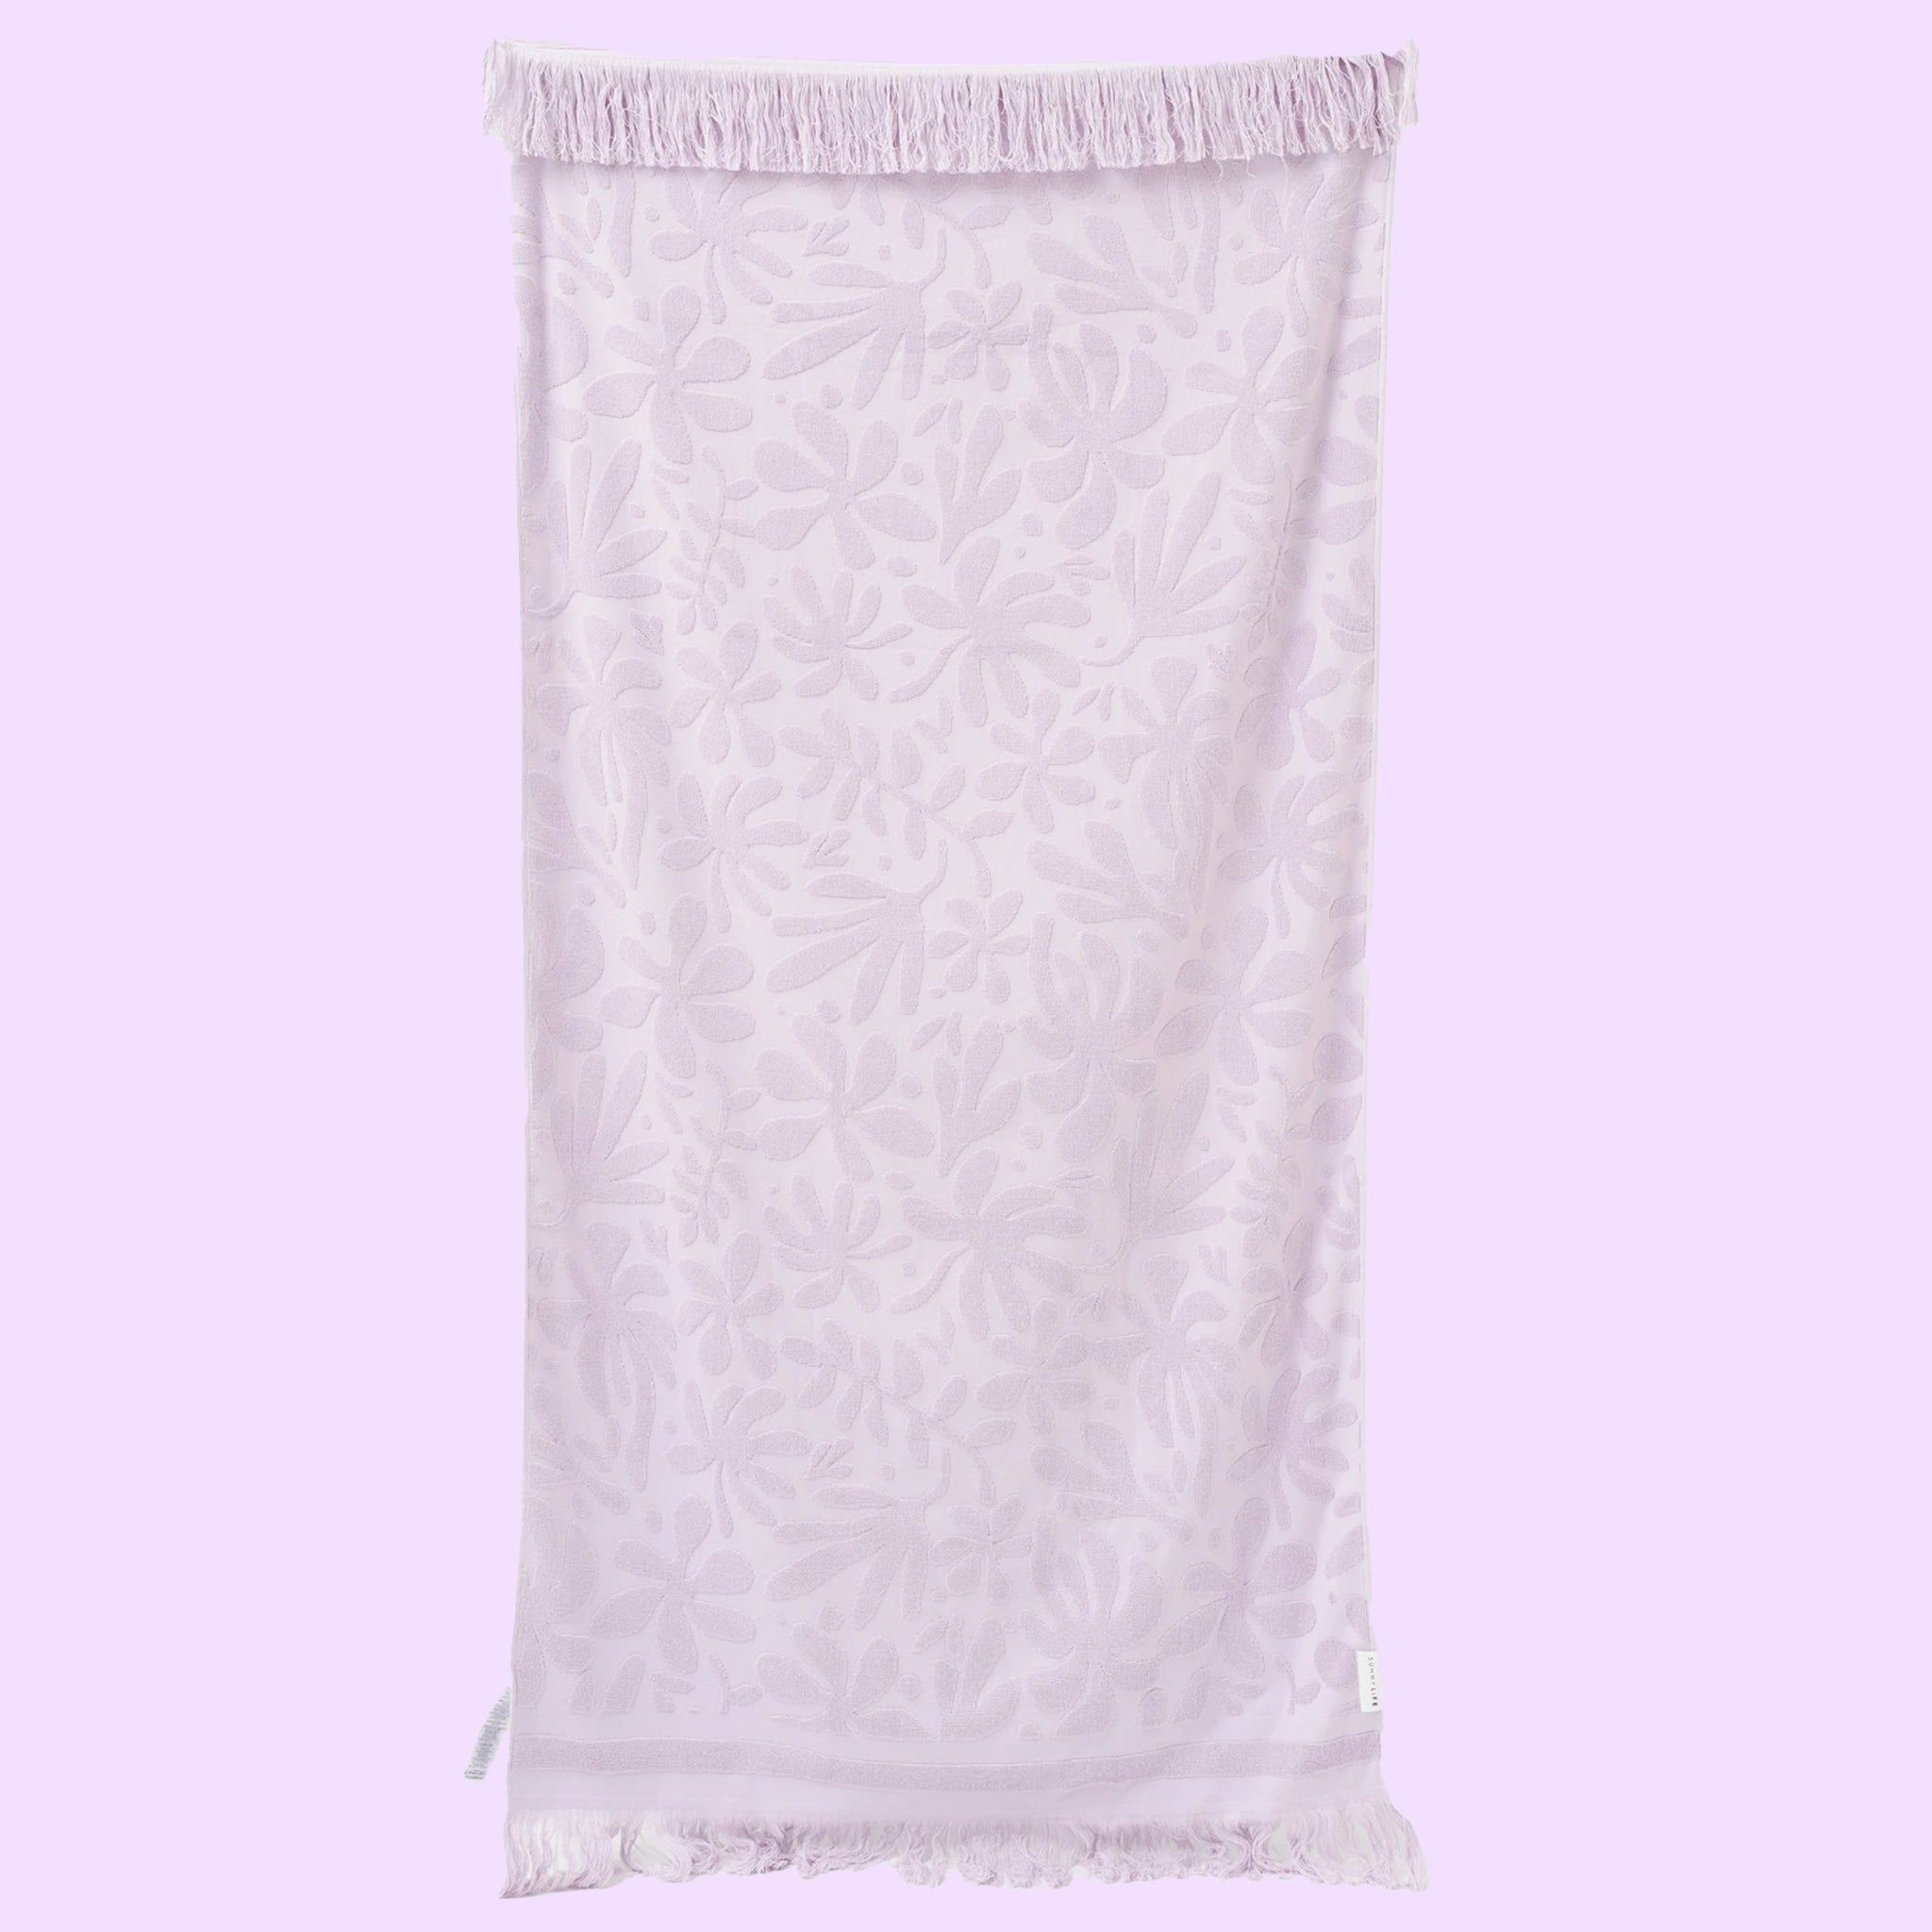 On a purple background is a light purple towel with a subtle floral print and fringe edge. 